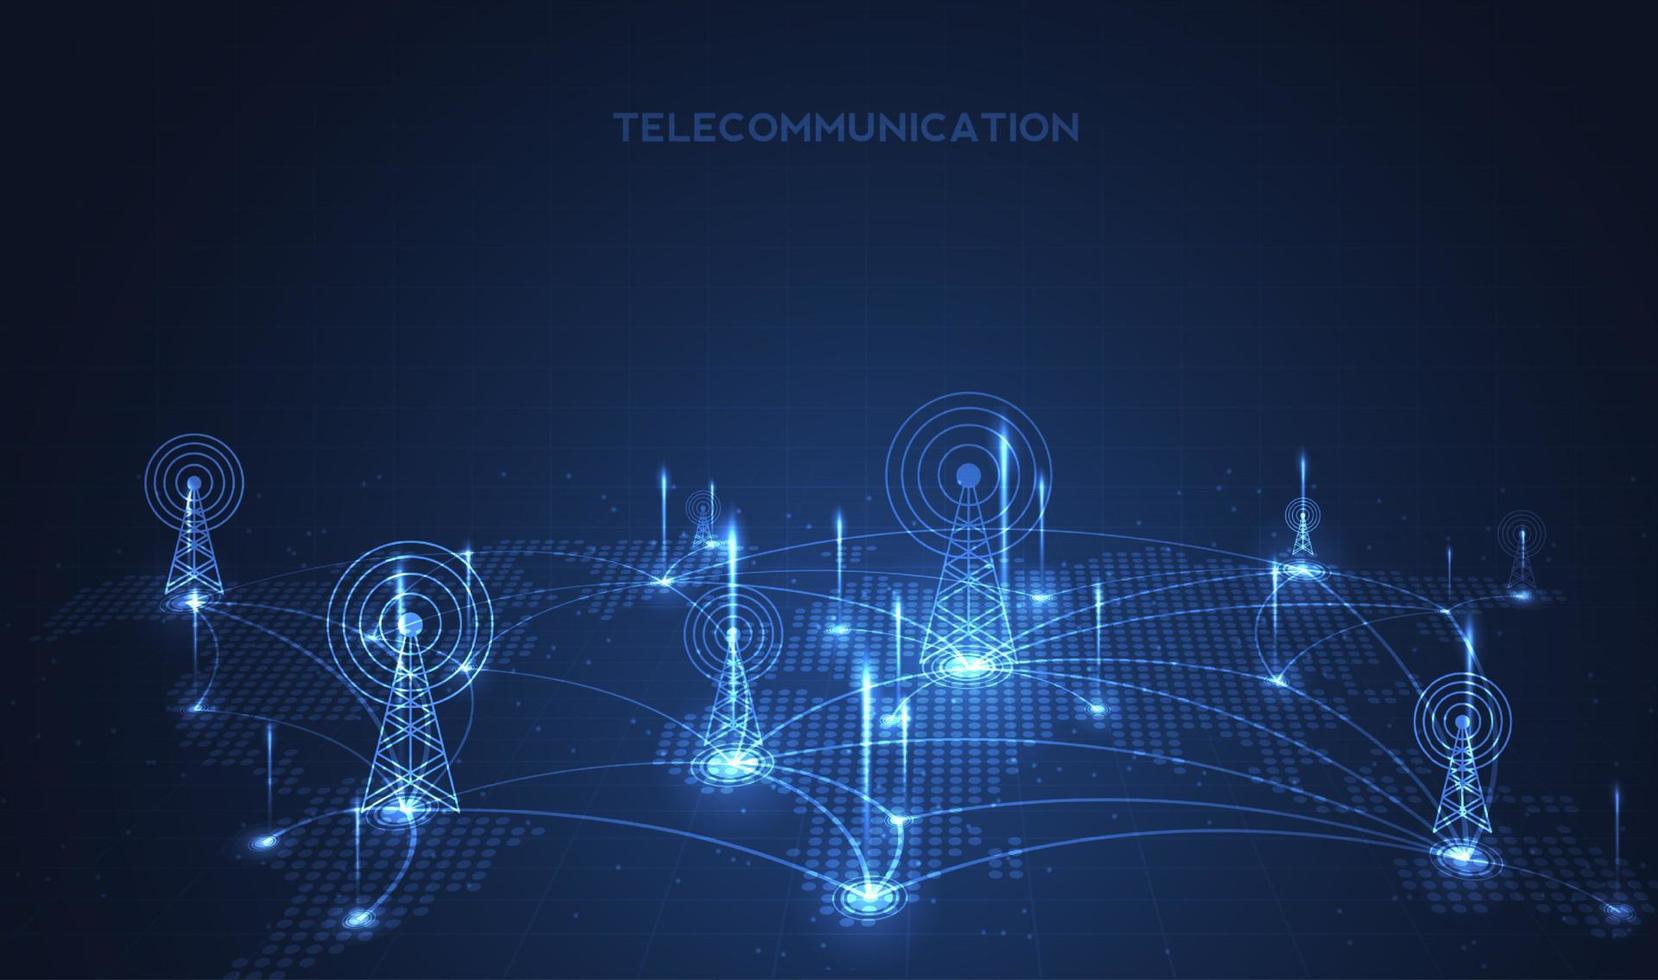 TeleBuild is a leading media platform all telecom infrastructure solutions